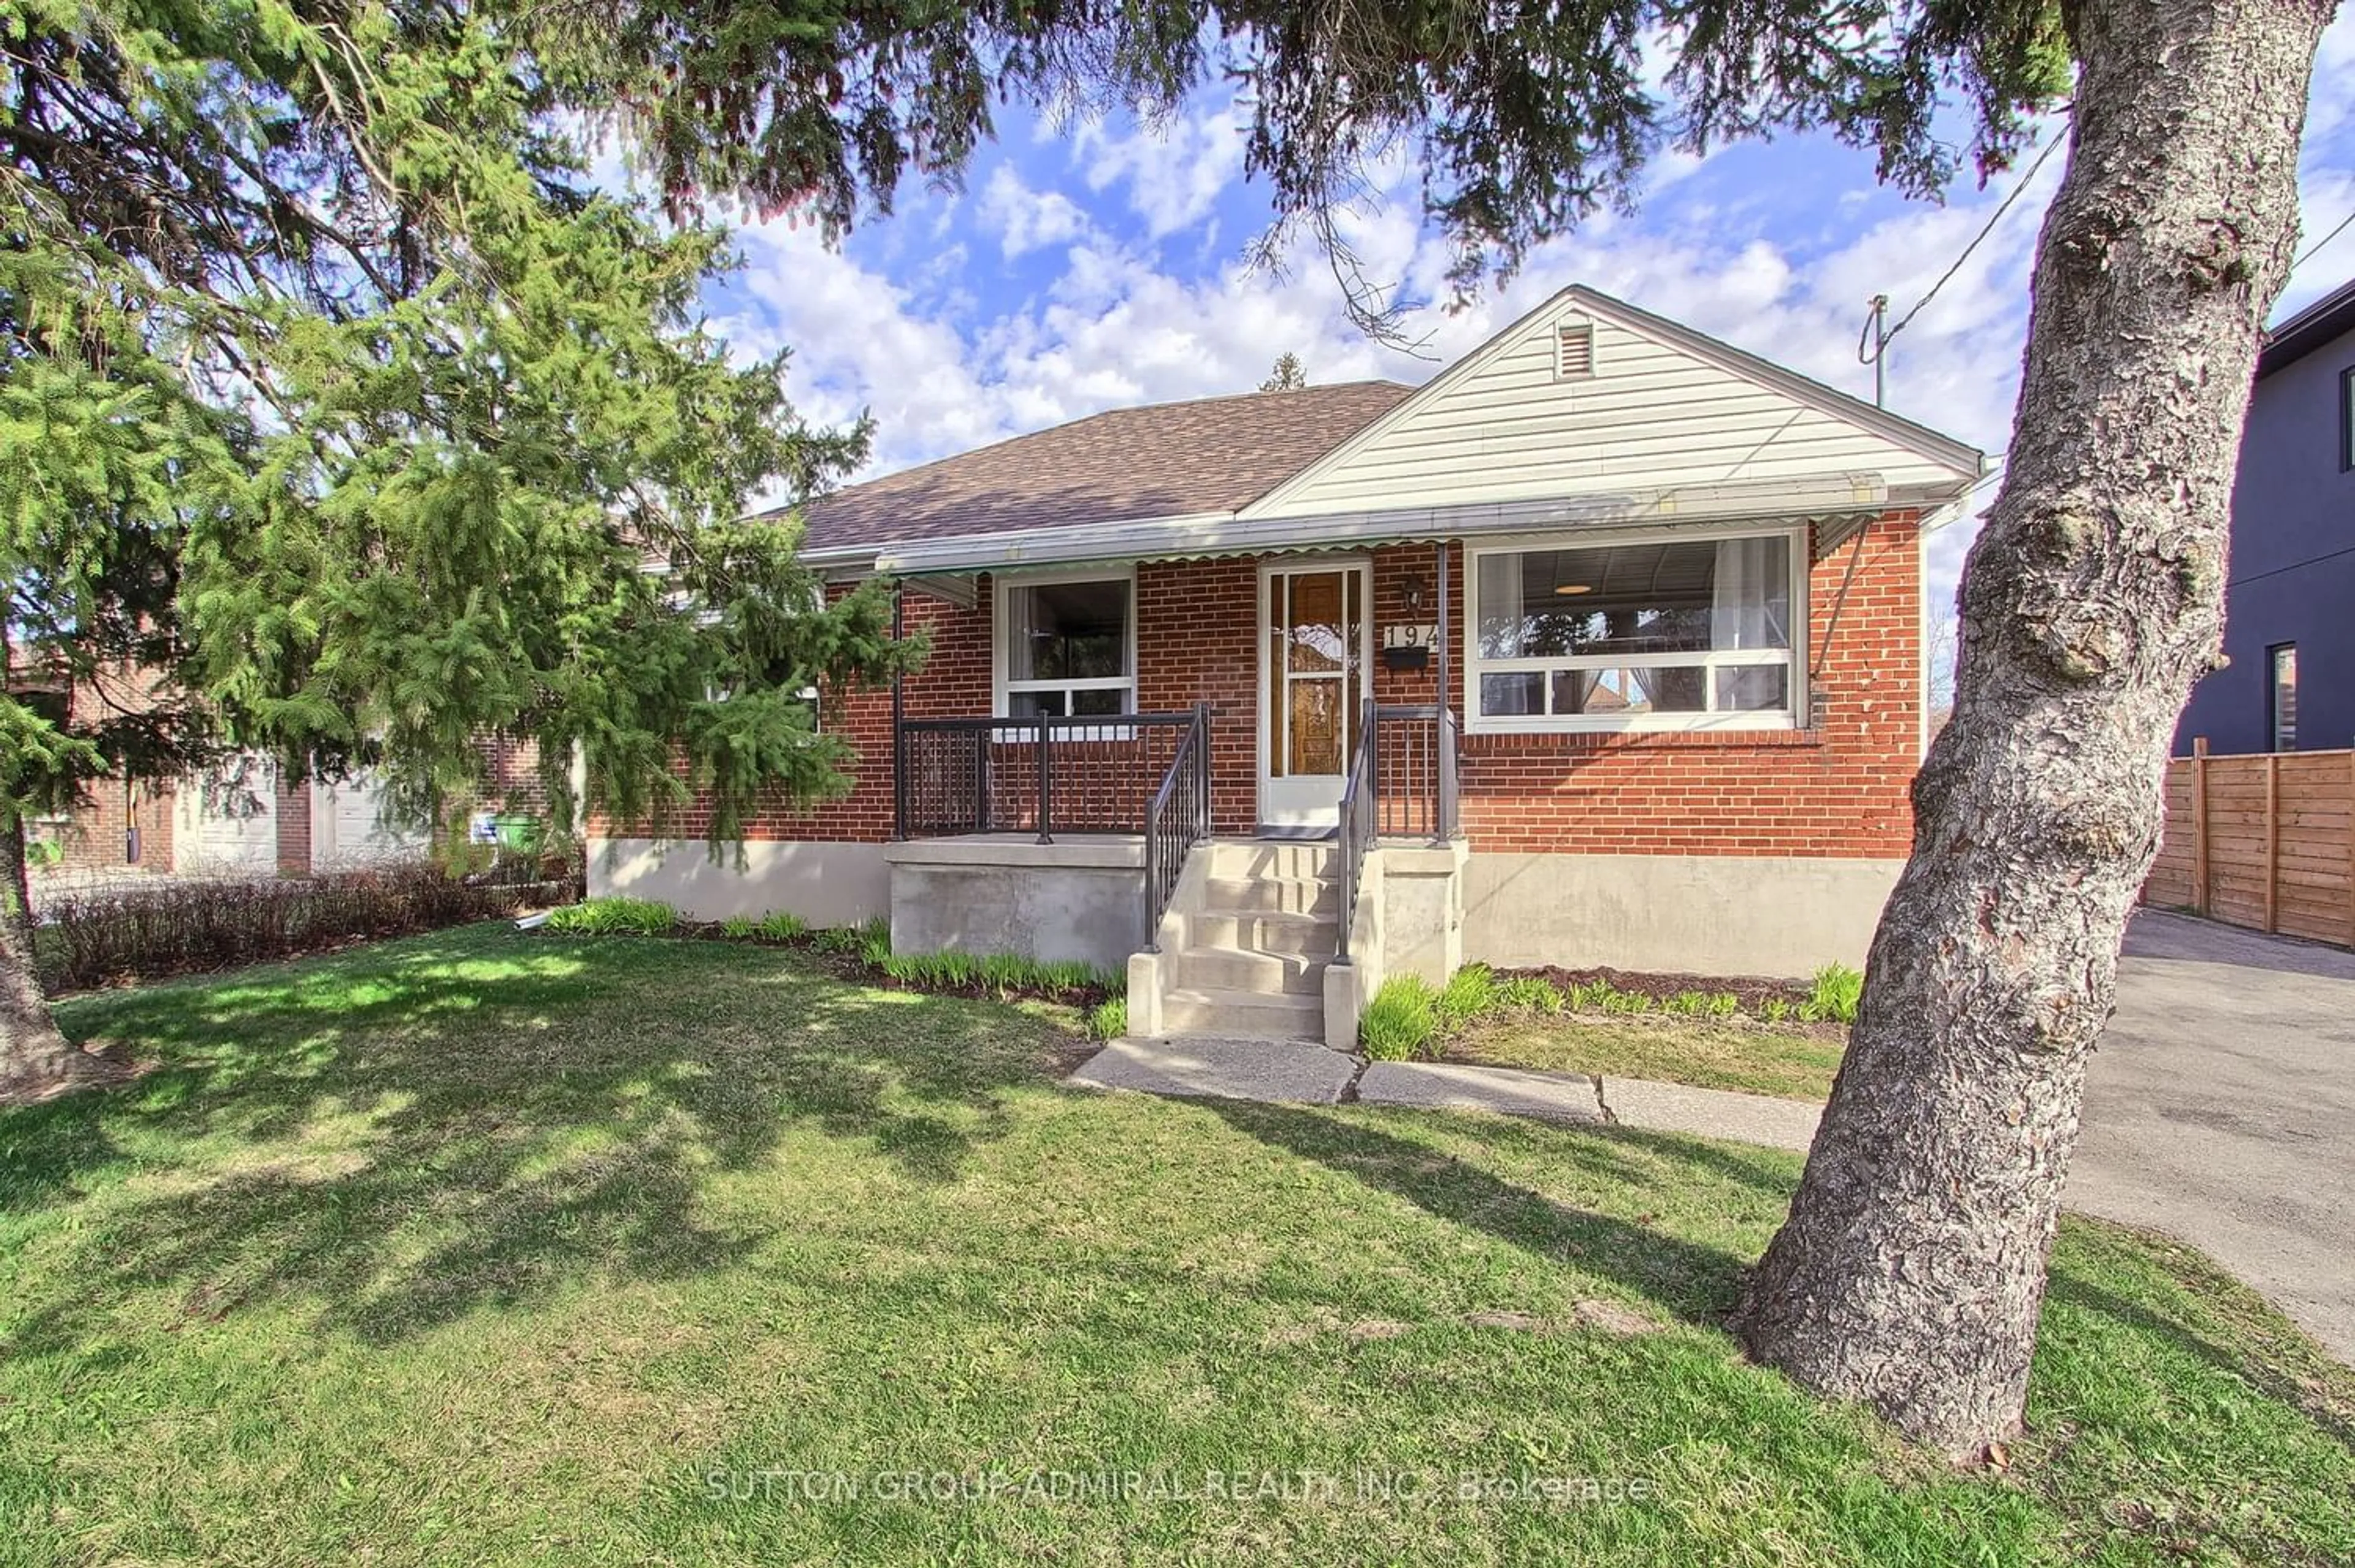 Home with brick exterior material for 194 Cocksfield Ave, Toronto Ontario M3H 3T5